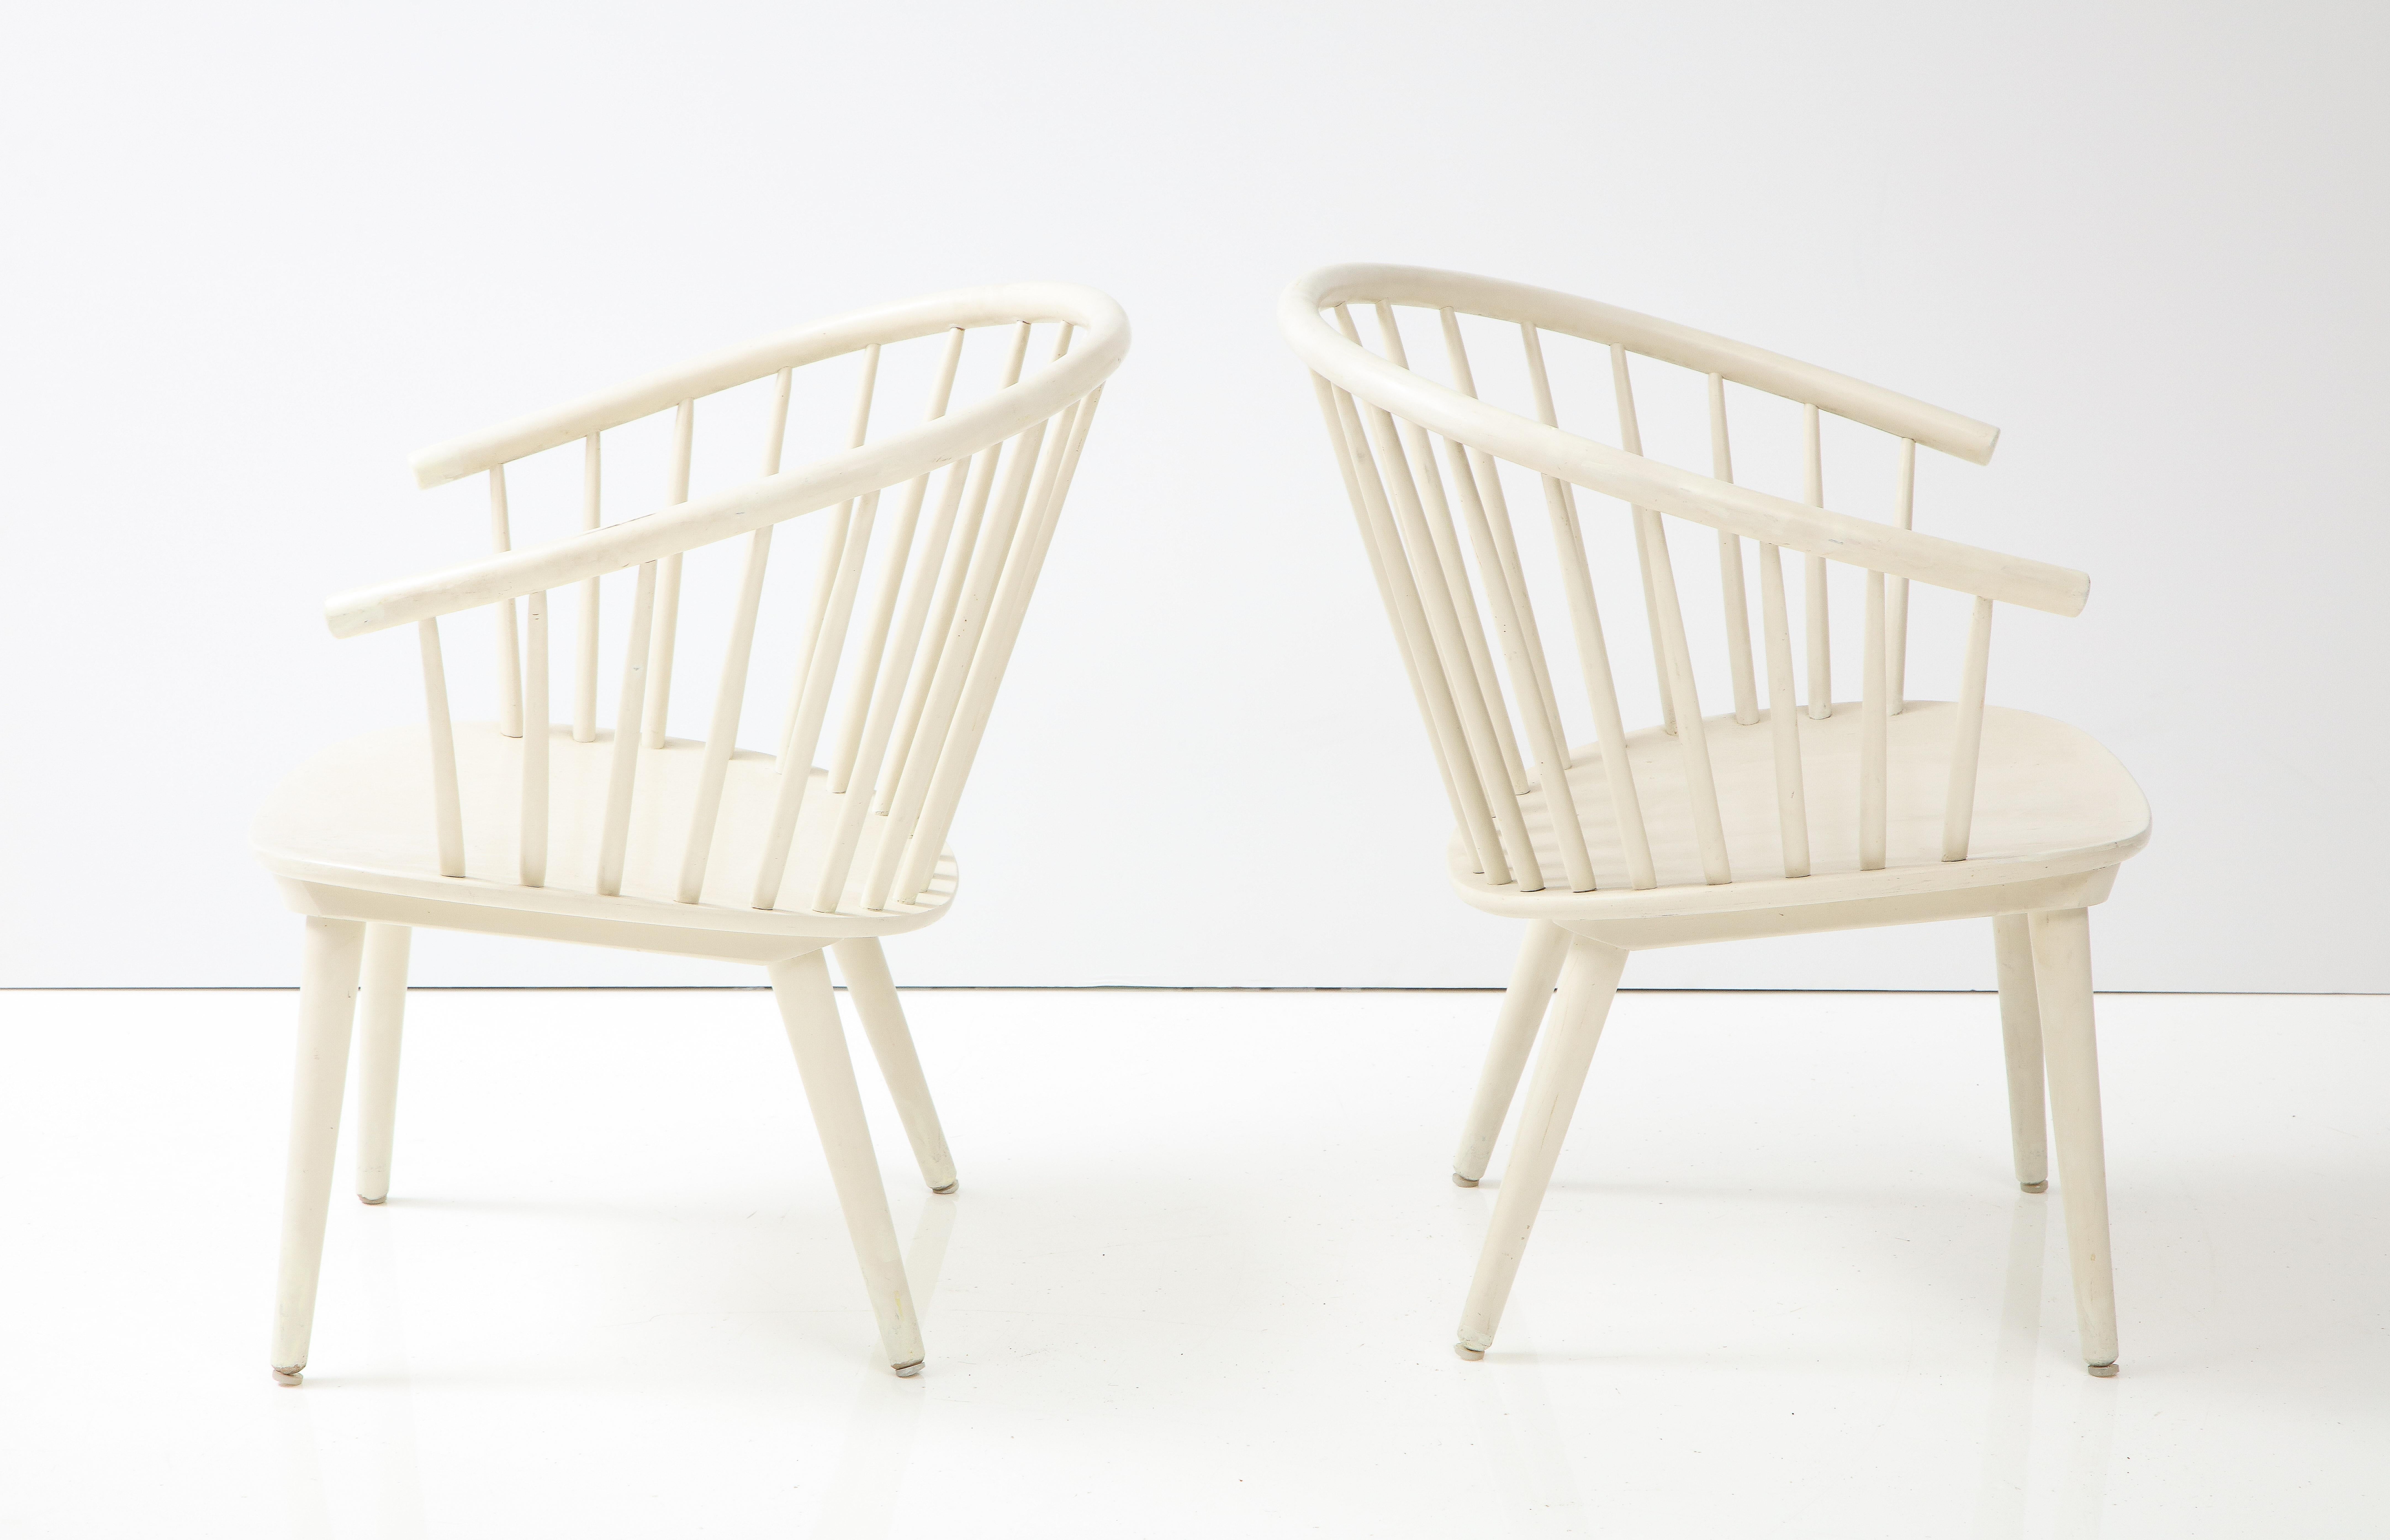 Pair of White Swedish Horseshoe Back Armchairs, Sweden, C. 1964 For Sale 3